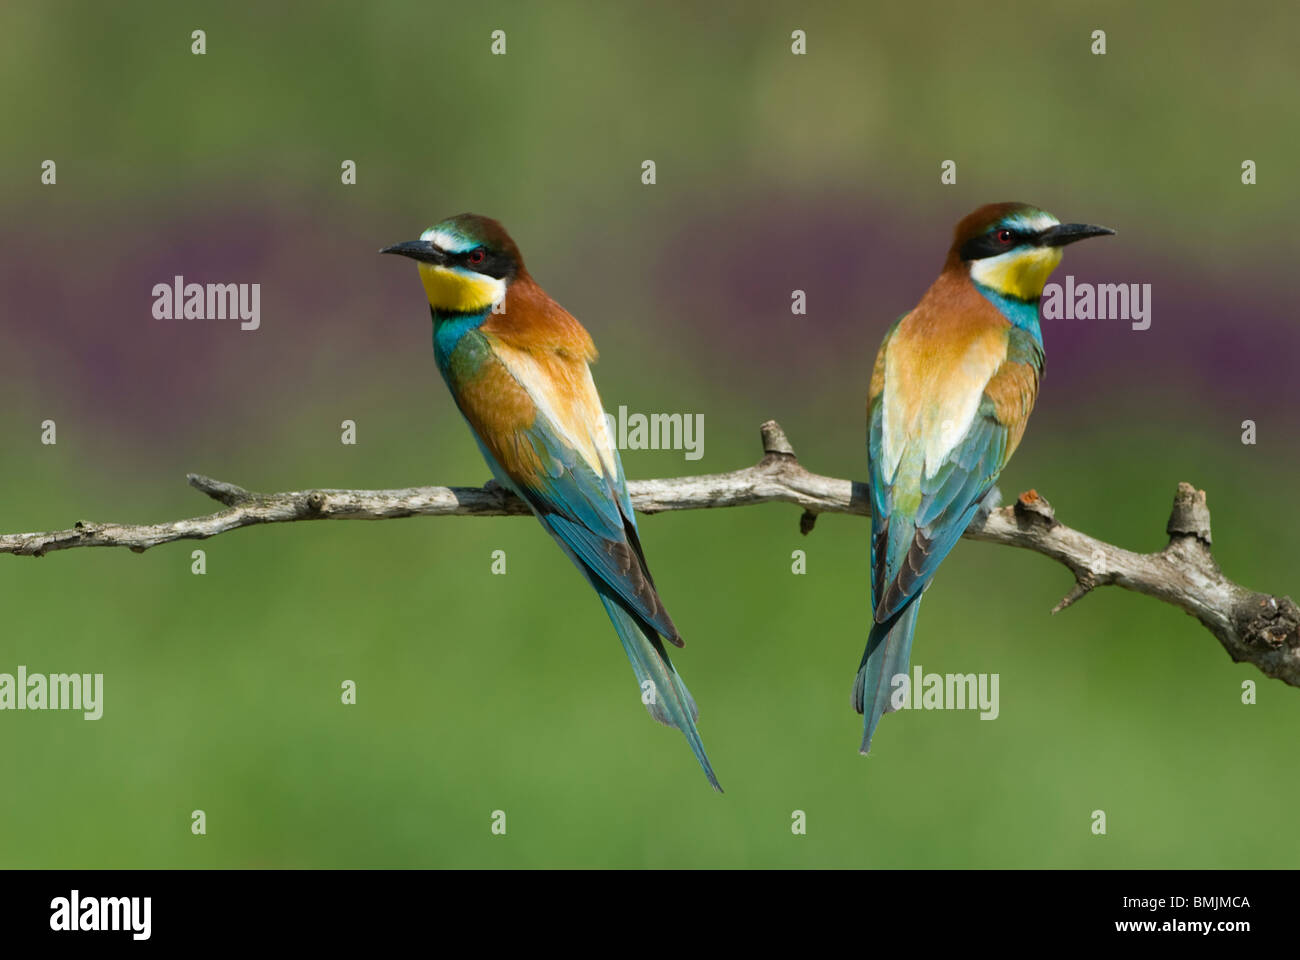 Europe, Hungary, View of European bee eaters perched on branch, close-up Stock Photo